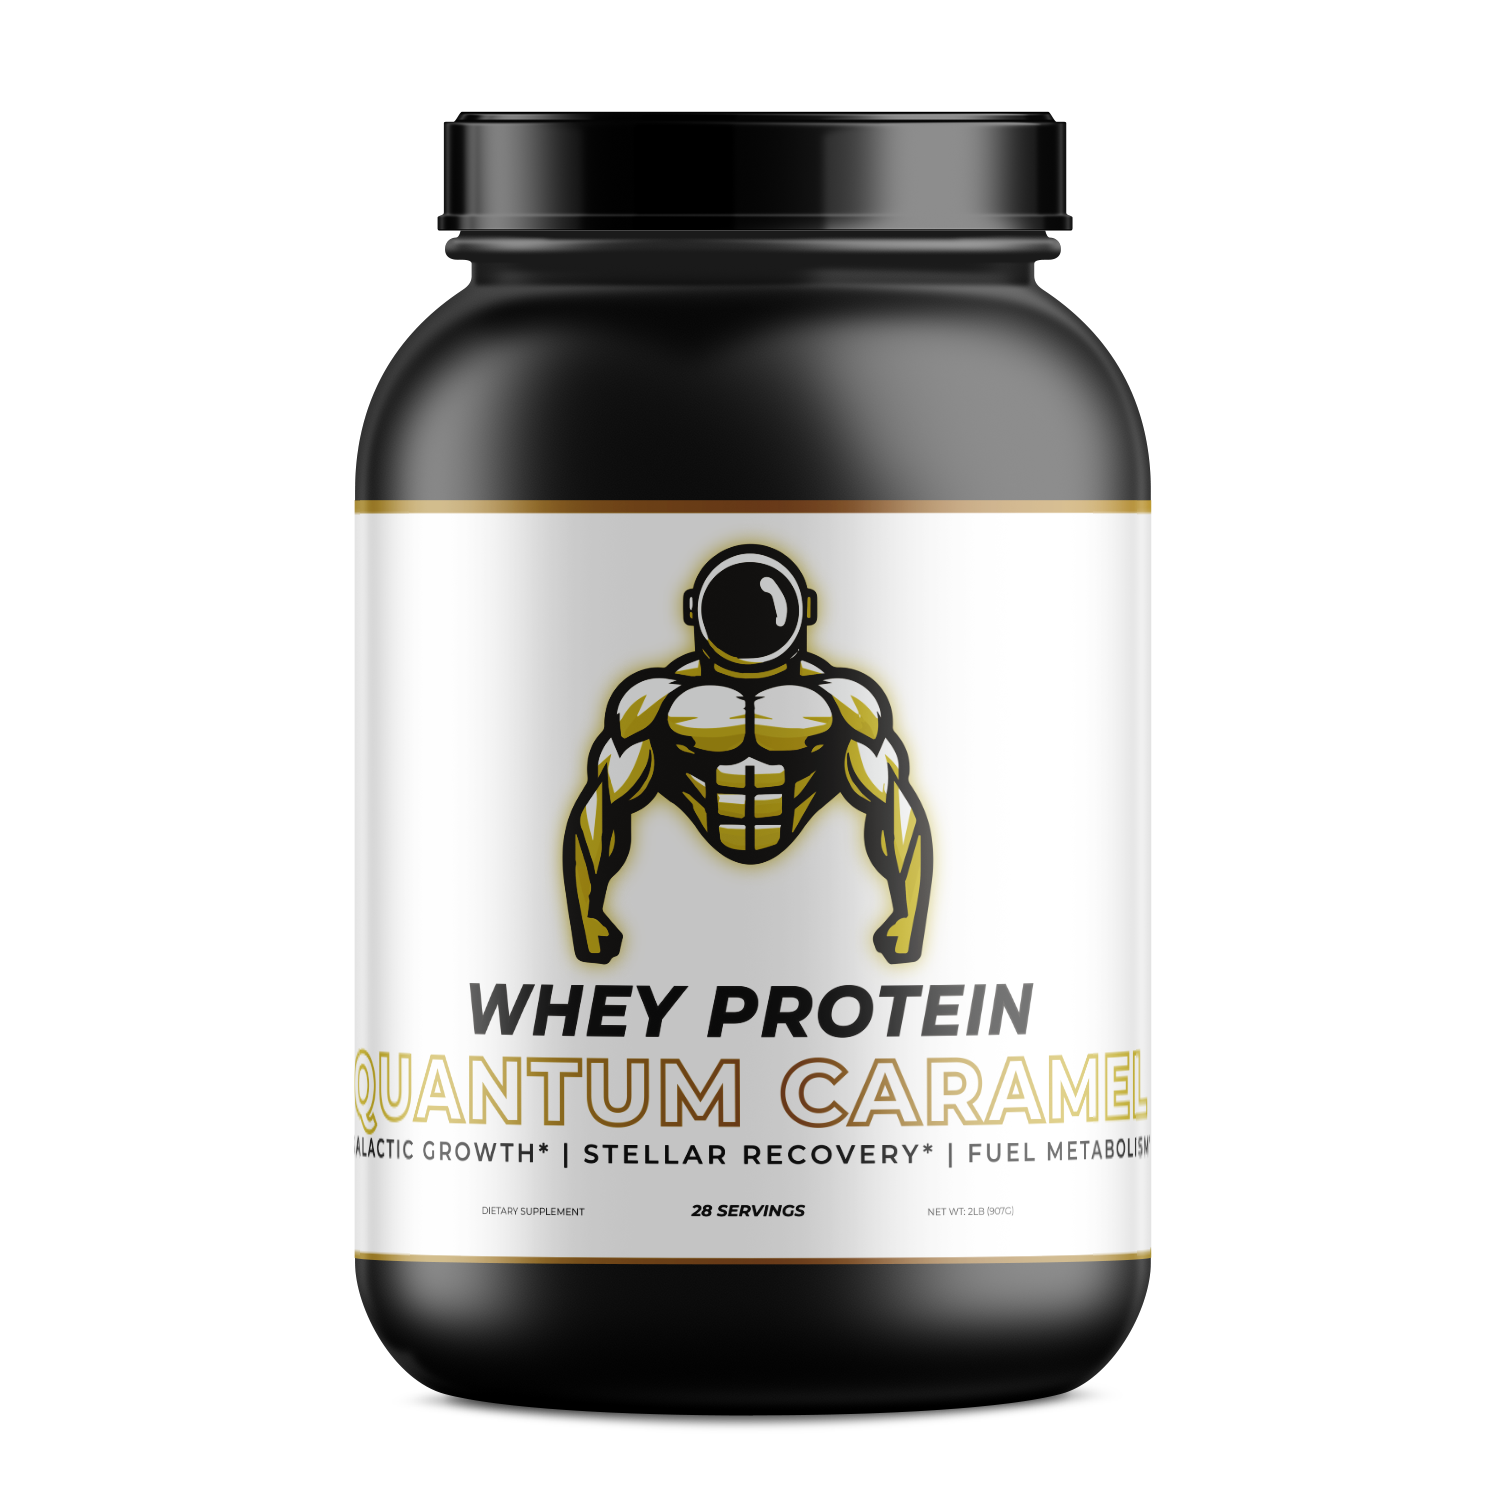 Caramel flavored whey protein, in a black container, the logo is of a strong astronaut.